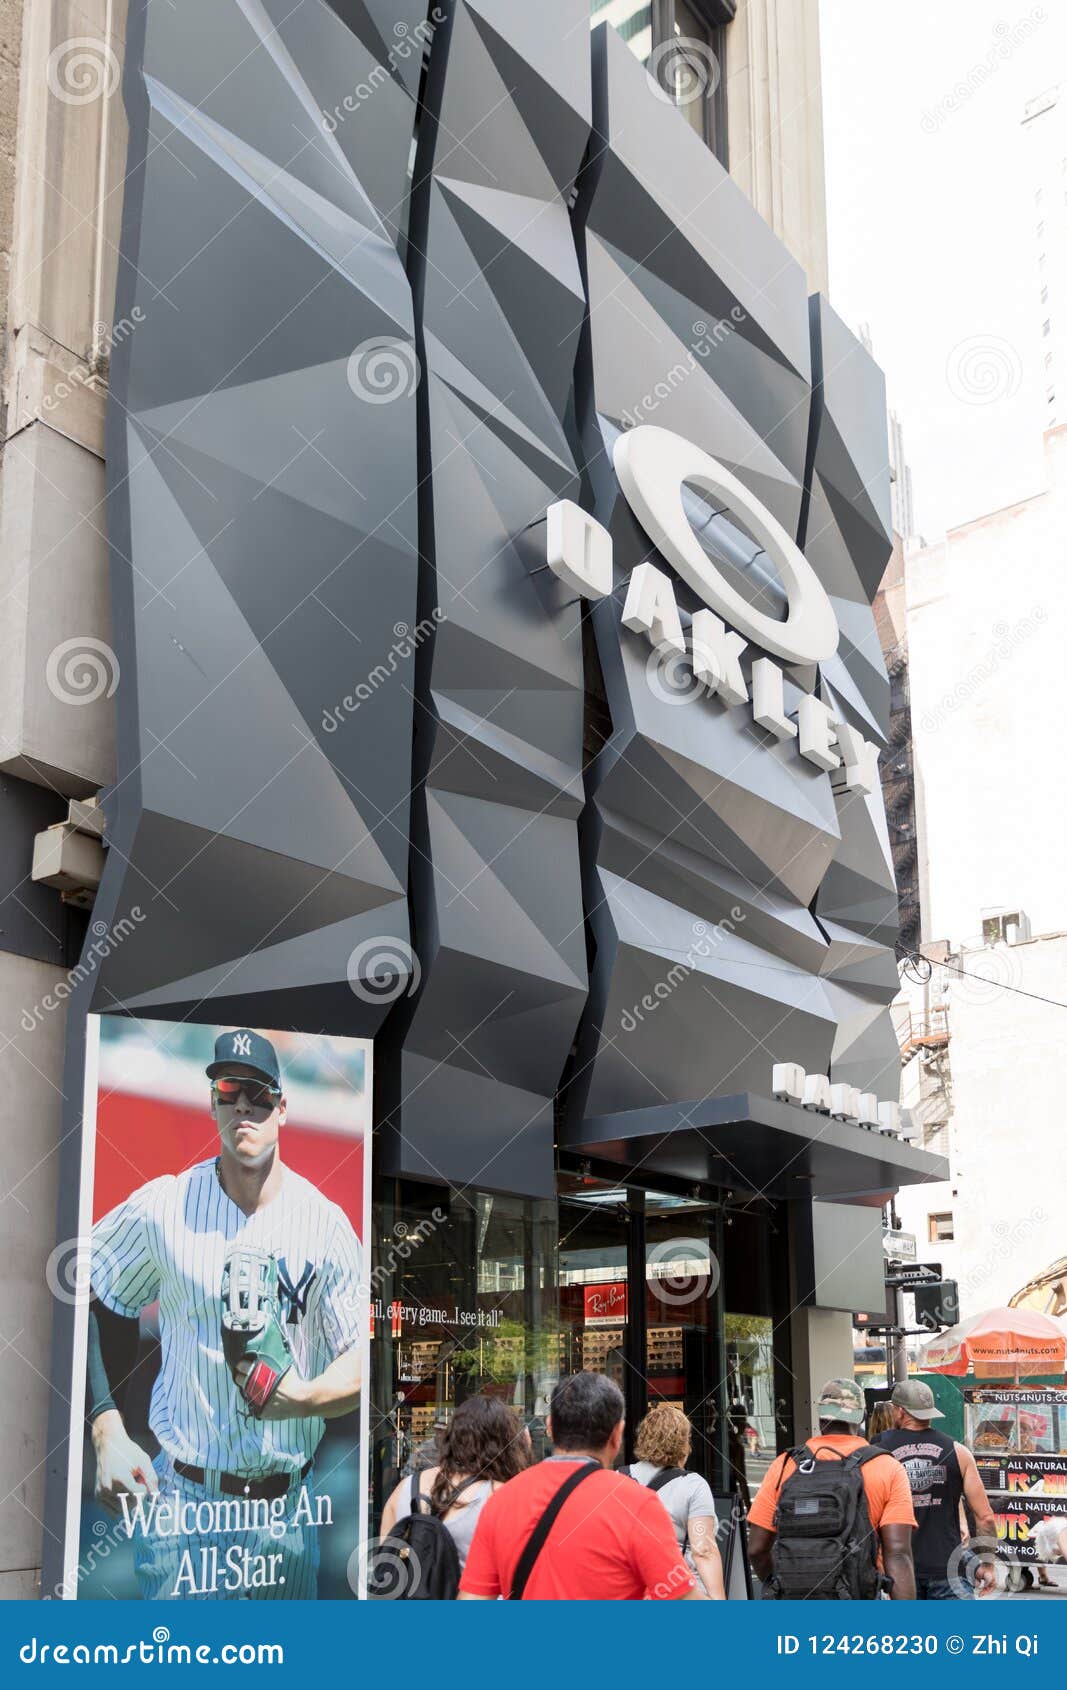 all star new york store